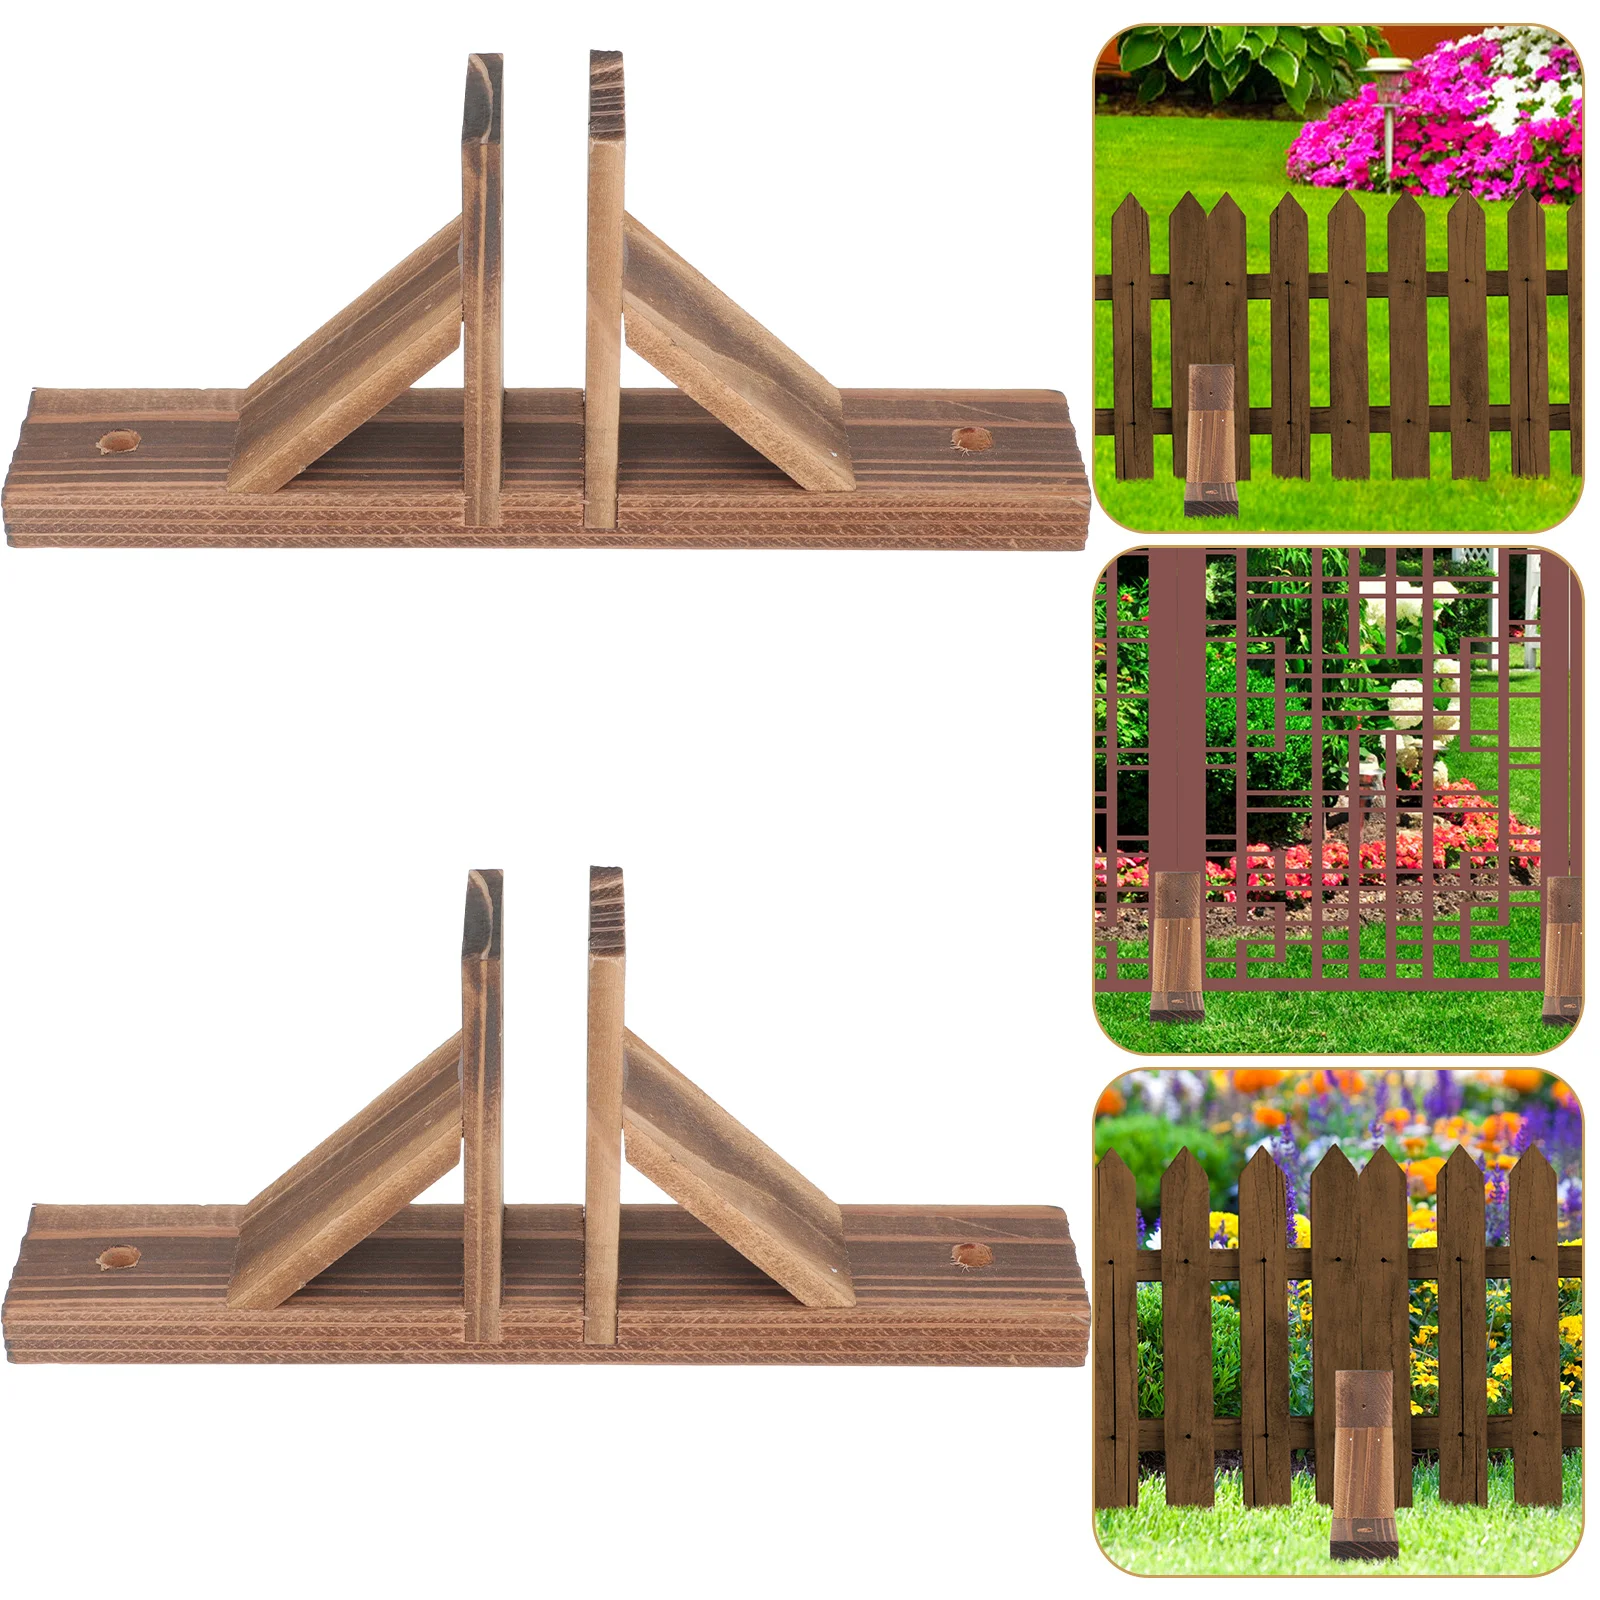 

2 Pcs Indoor Pet Fence Fences Base Kit Small Wood Parts Wooden Garden Accessory Baby Supply Fixed Support